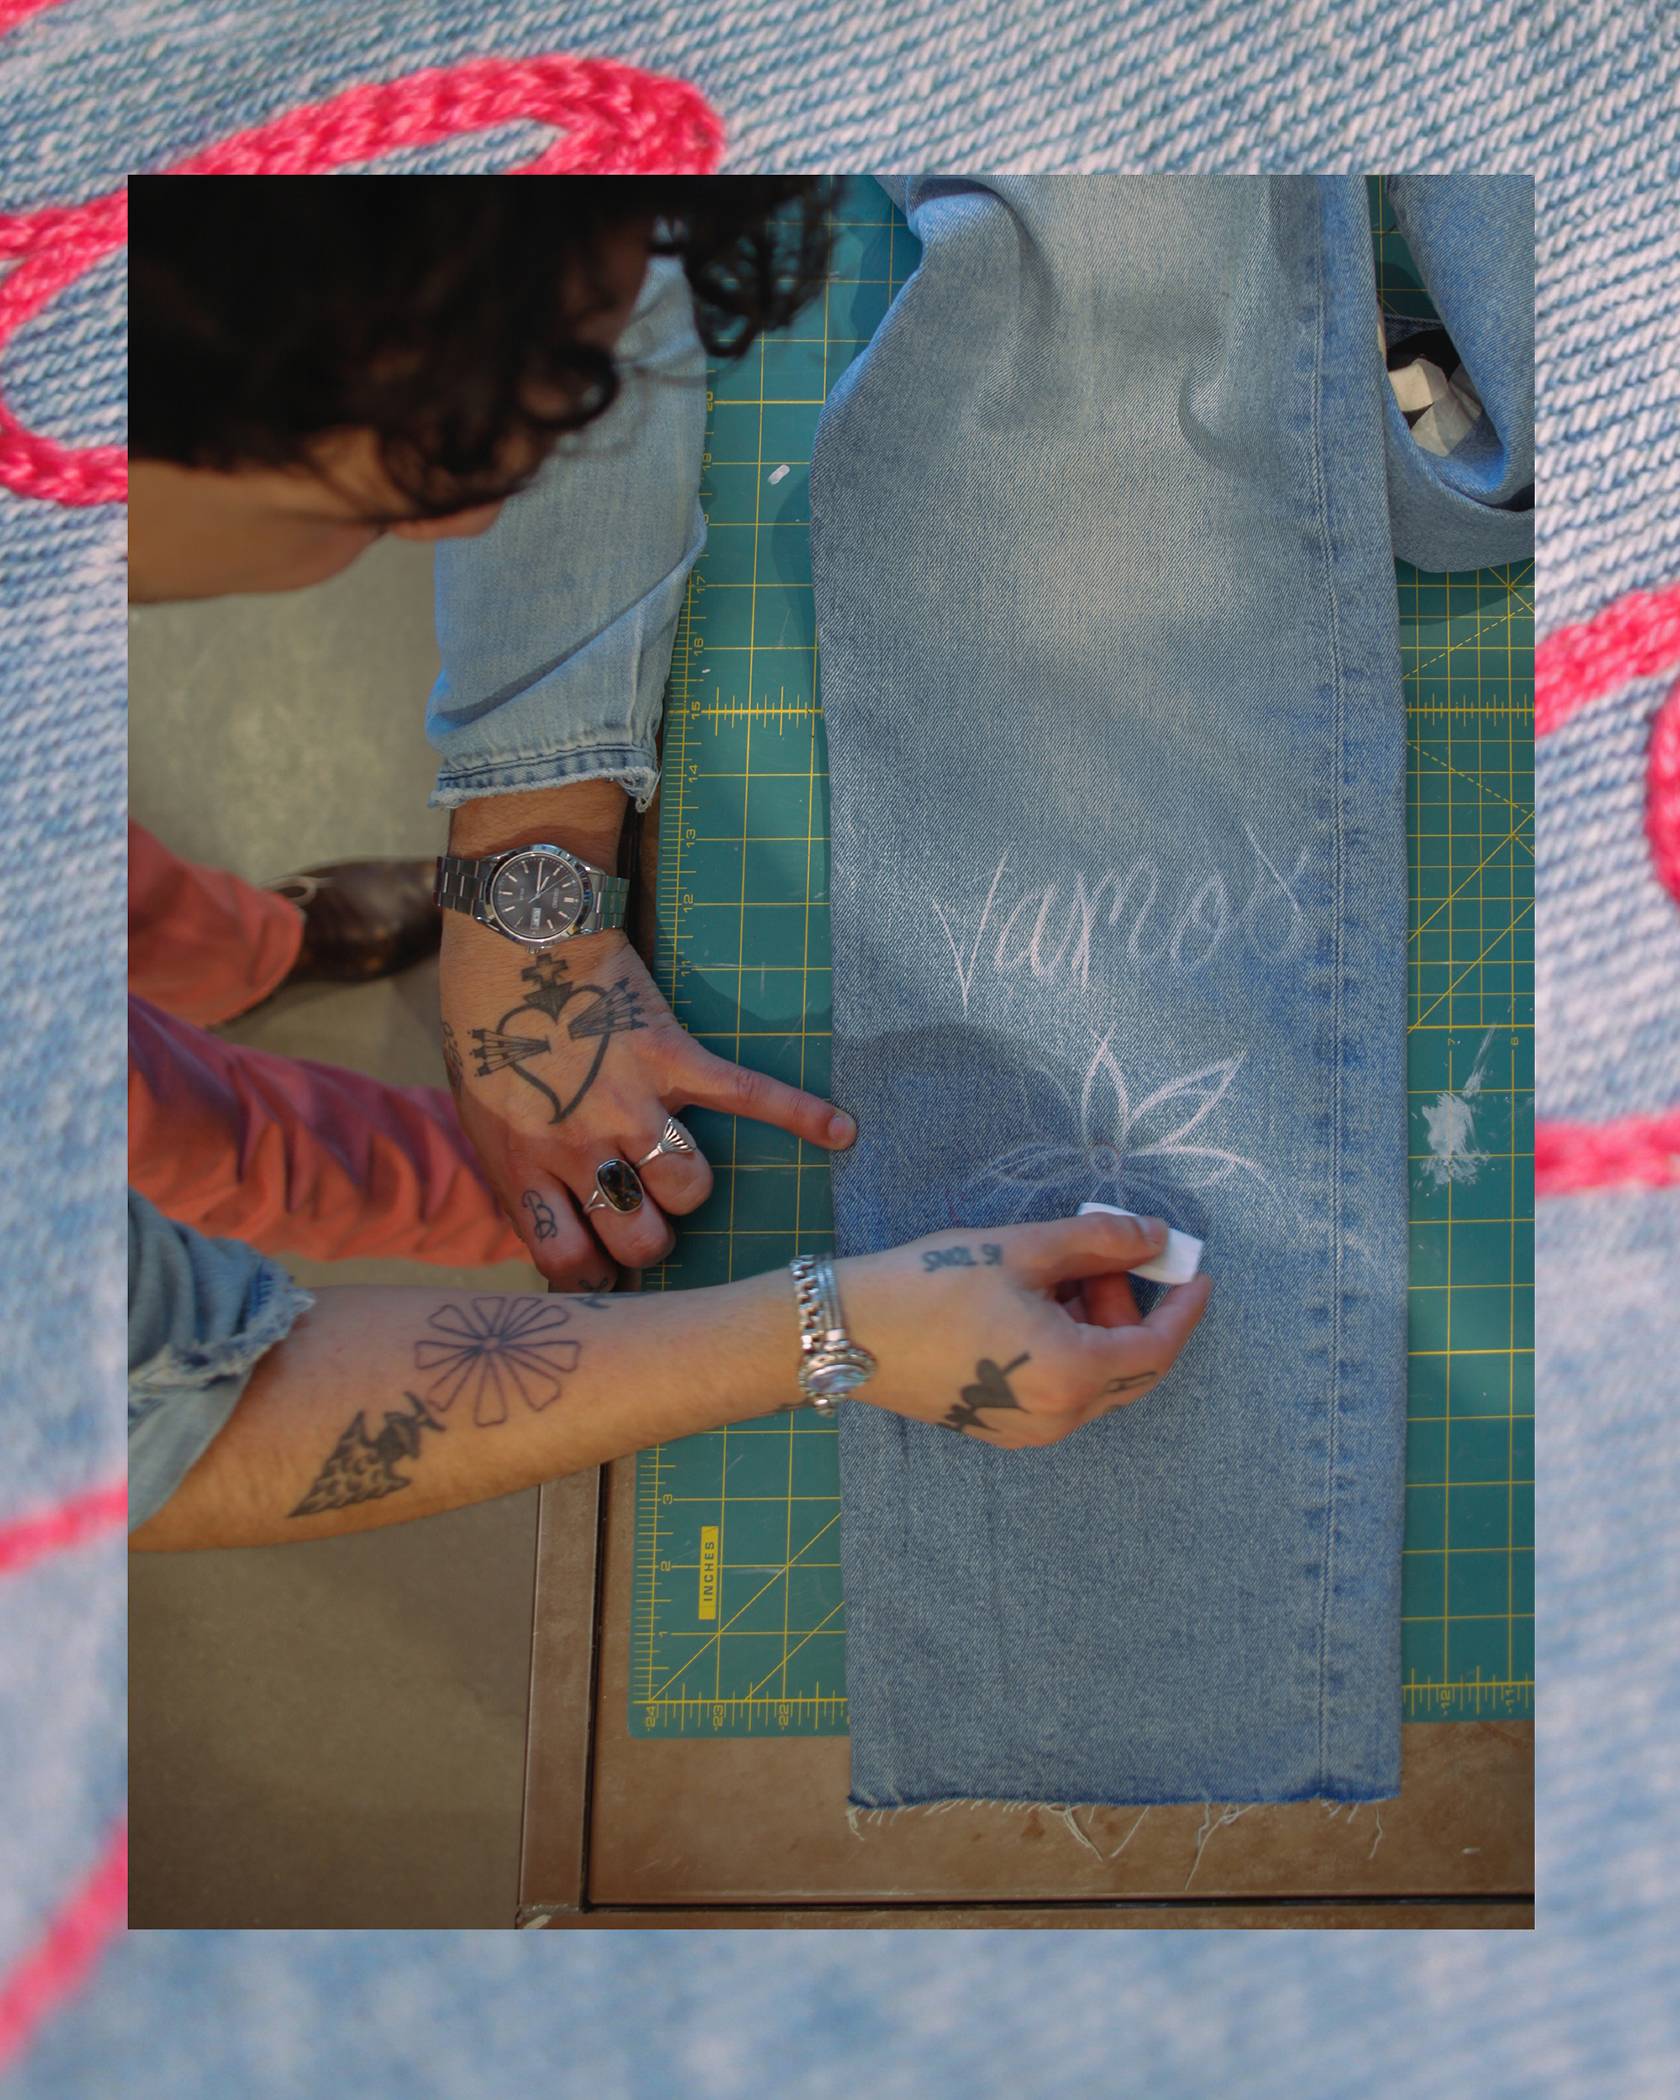 Brian Chavez drawing on jeans